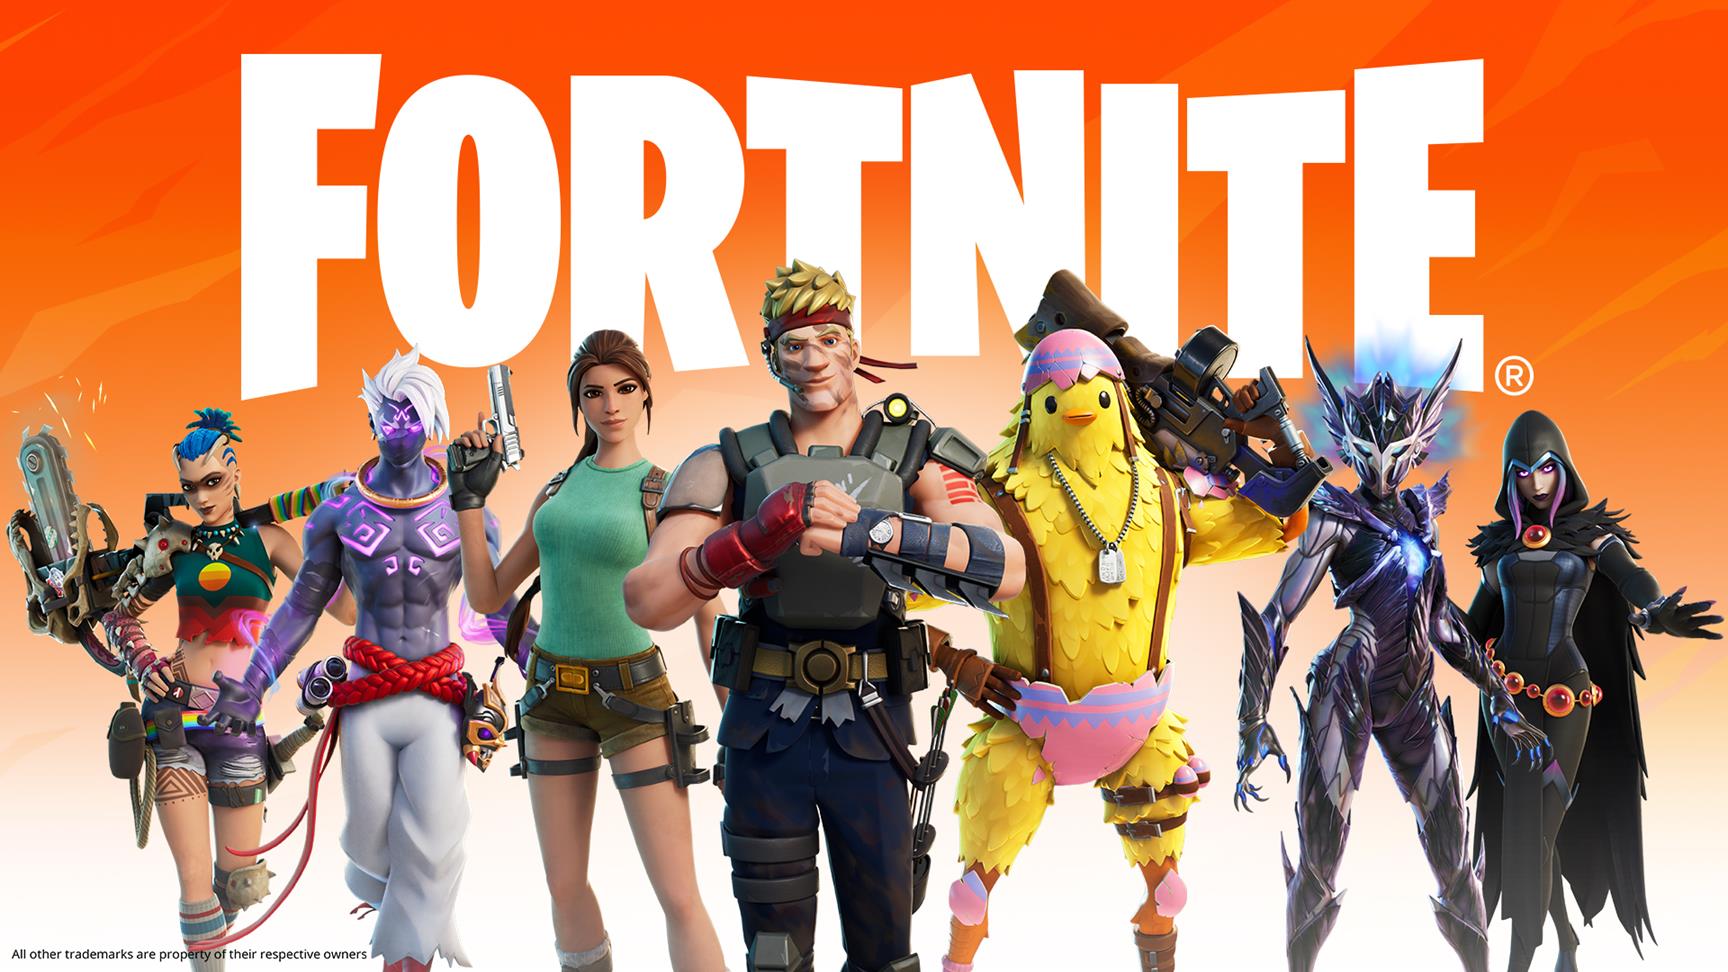 Image for Google considered buying Epic Games when the two clashed over Fortnite